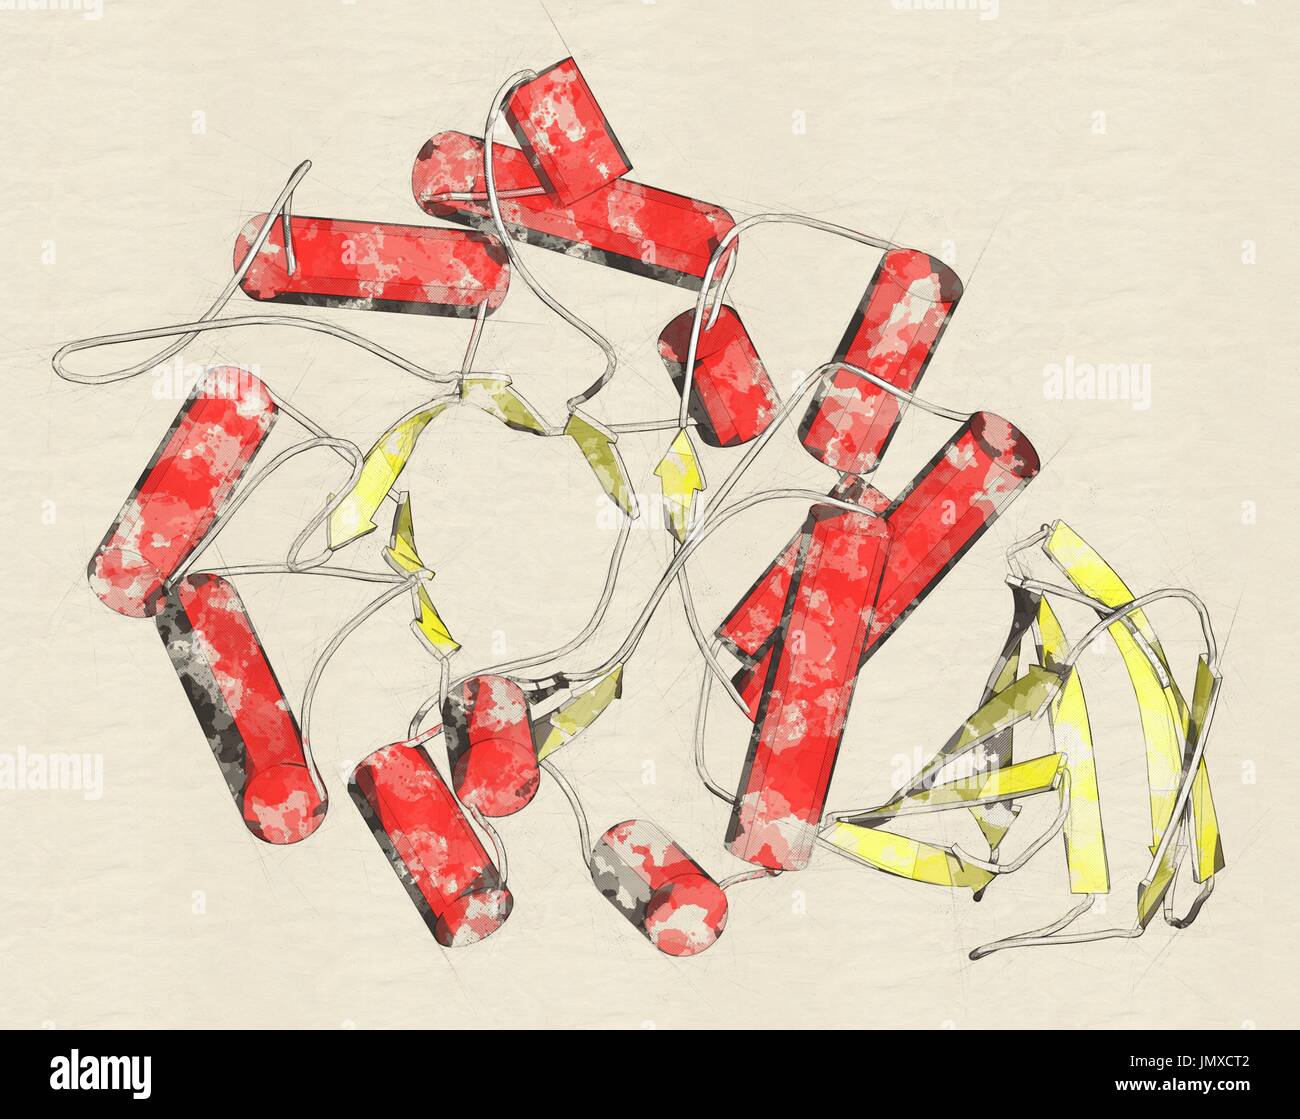 Alpha-galactosidase (Agalsidase) enzyme. Cause of Fabry's disease. Administered as enzyme replacement therapy. Stylized cartoon model, secondary structure colouring (helices red, sheets yellow). Stock Photo